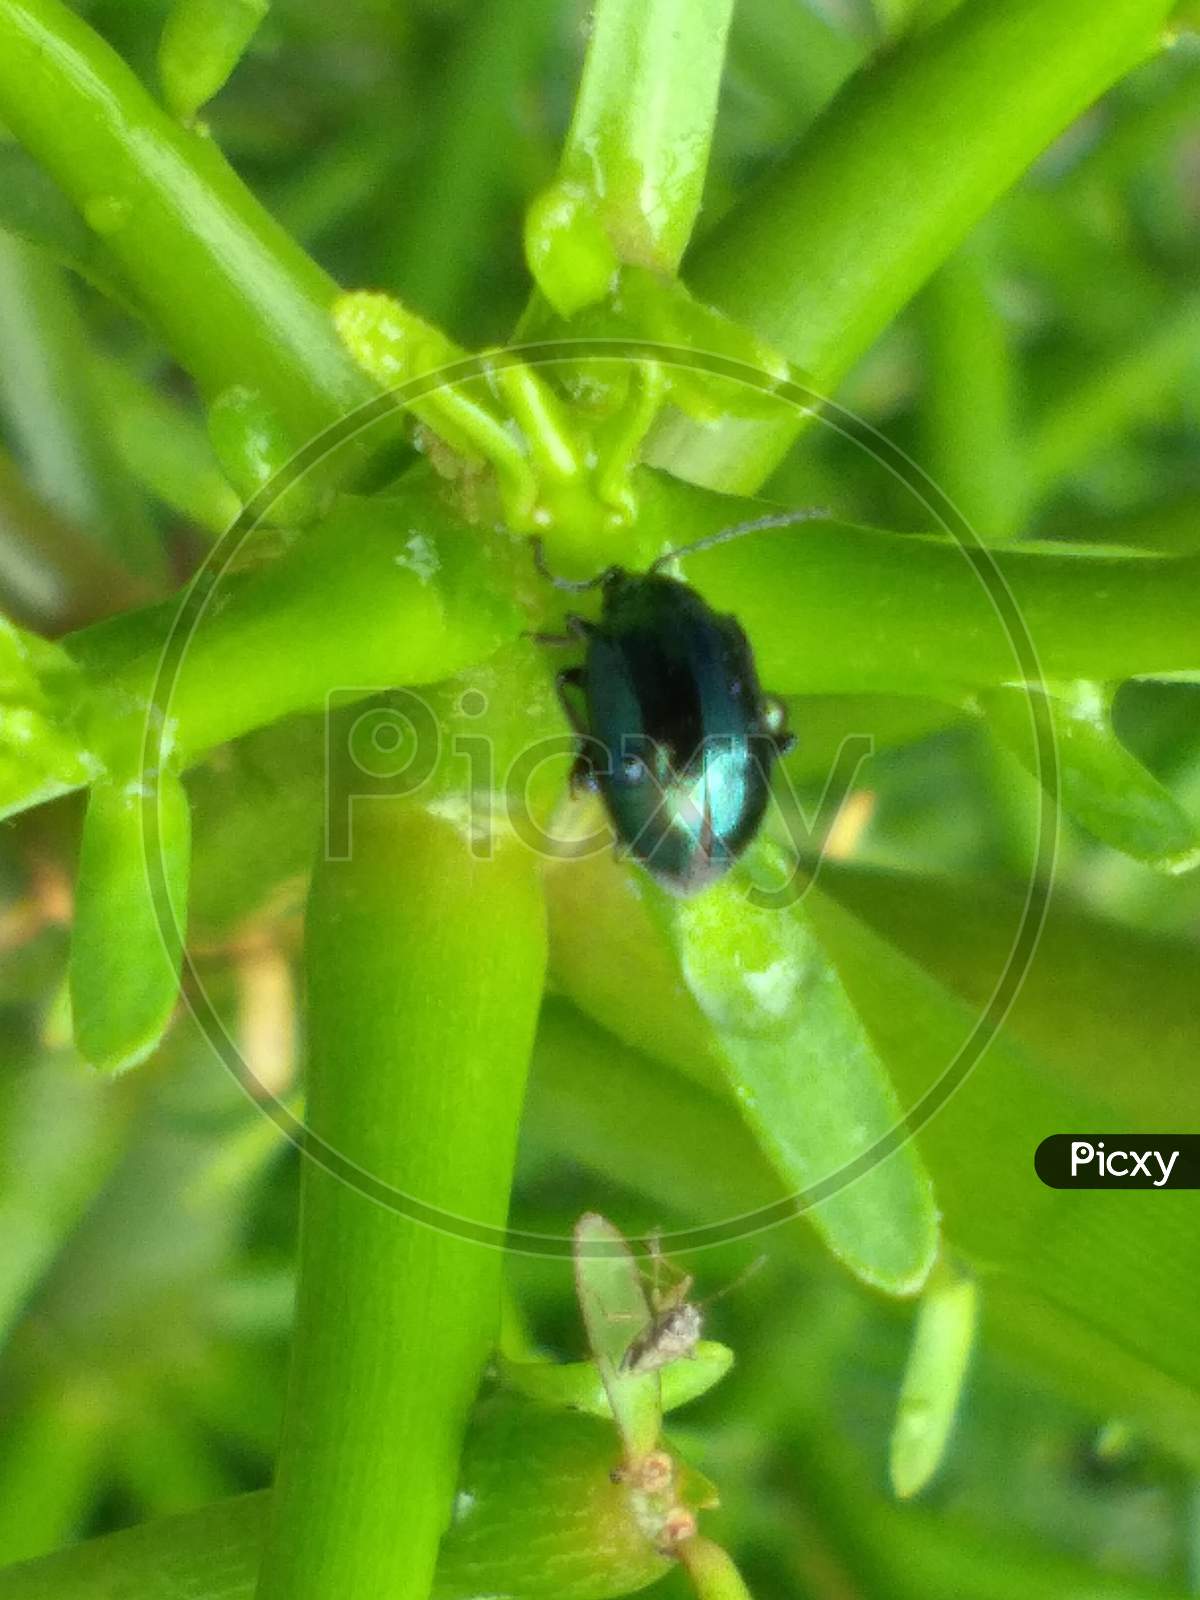 Closed view of blue beetle sitting on green pants surface